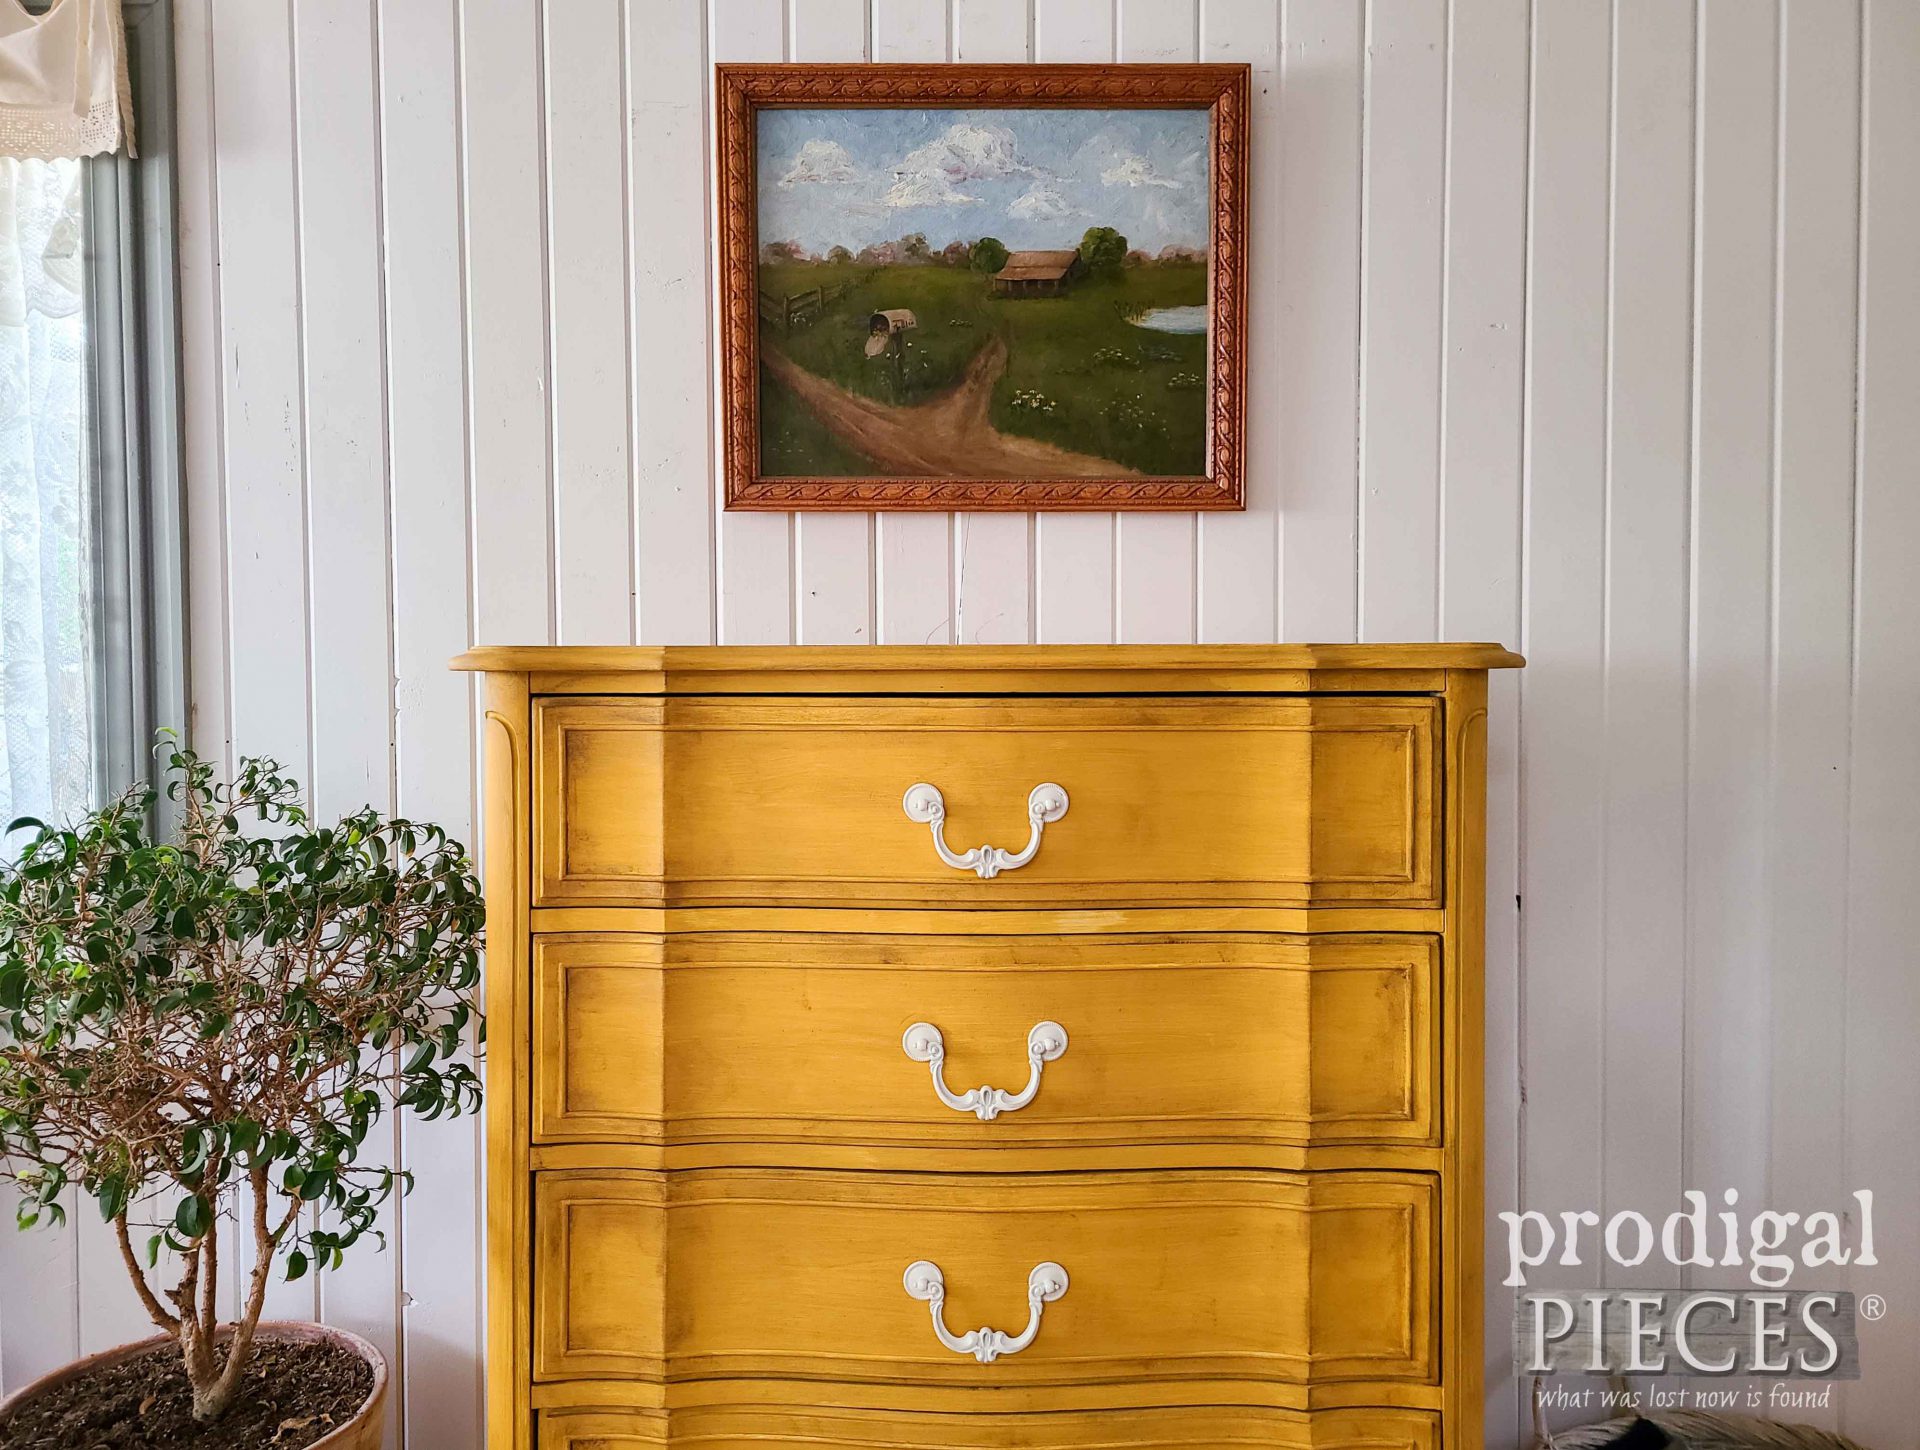 Vintage Yellow Chest of Drawers by Larissa of Prodigal Pieces | prodigalpieces.com #prodigalpieces #vintage #diy